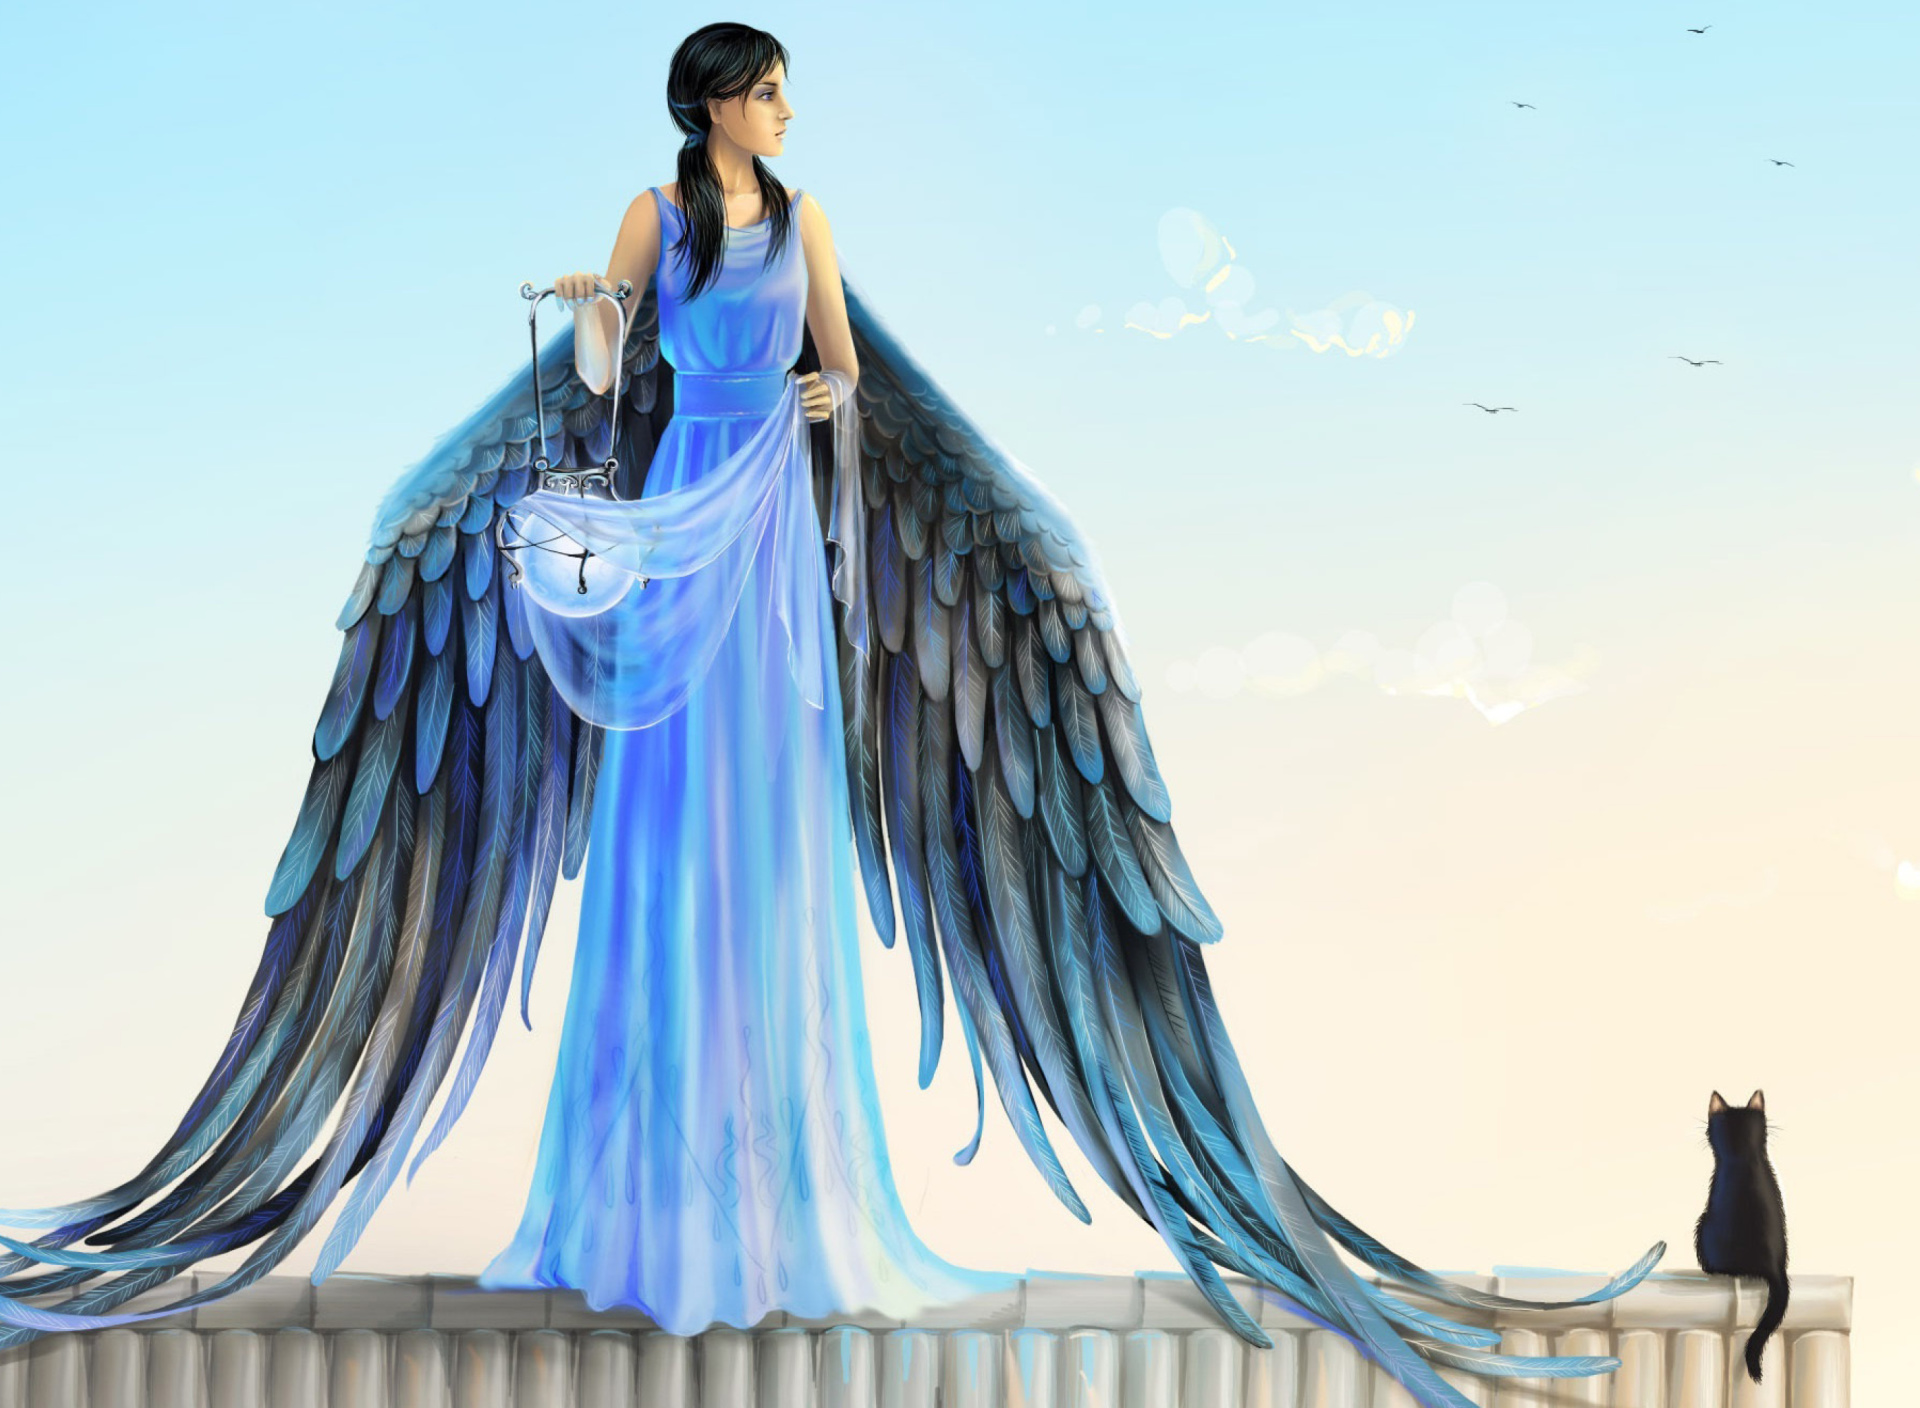 Das Angel with Wings Wallpaper 1920x1408